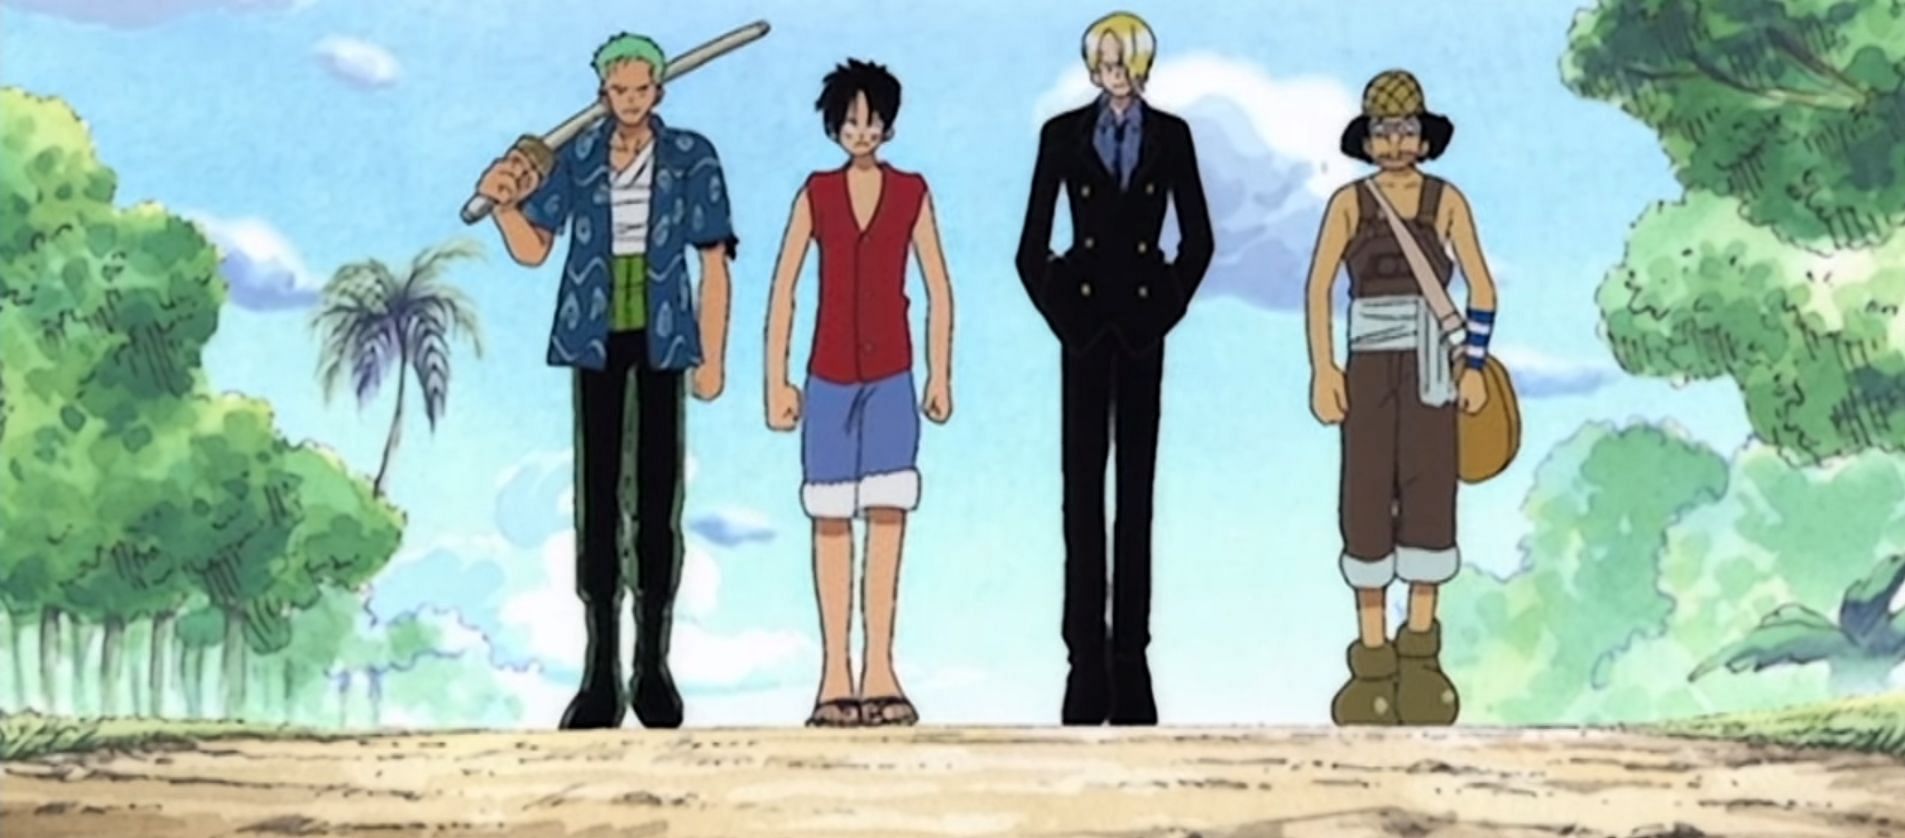 The Straw Hats approach Arlong Park for the arc&#039;s final confrontations. (Image via Toei Animation)